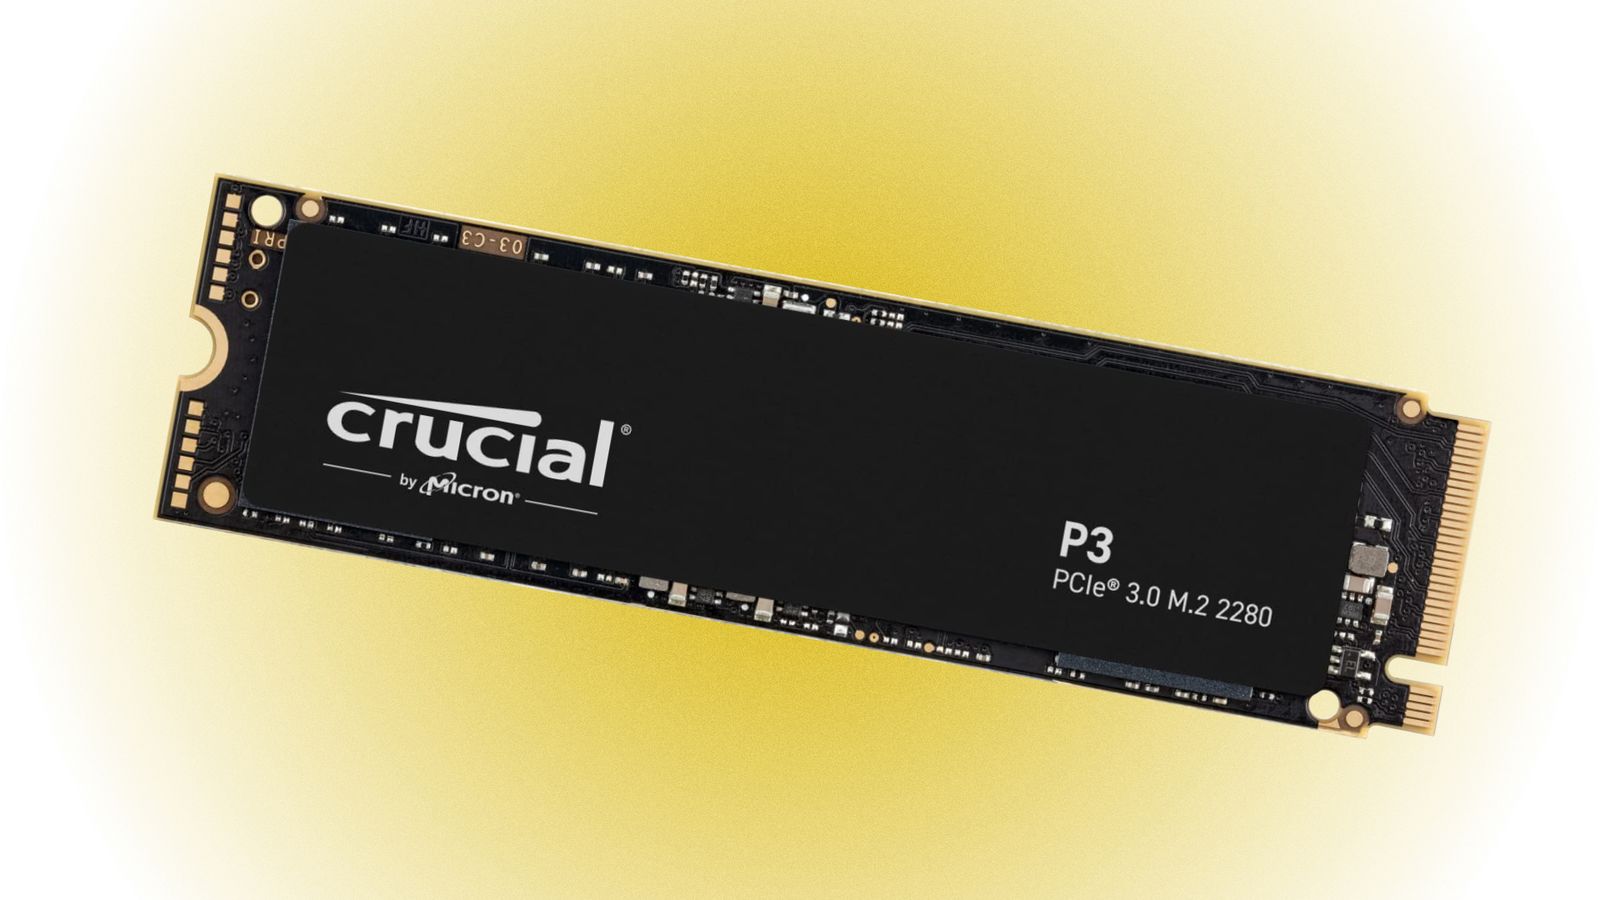 A Crucial P3 NVMe SSD against a yellow and white background